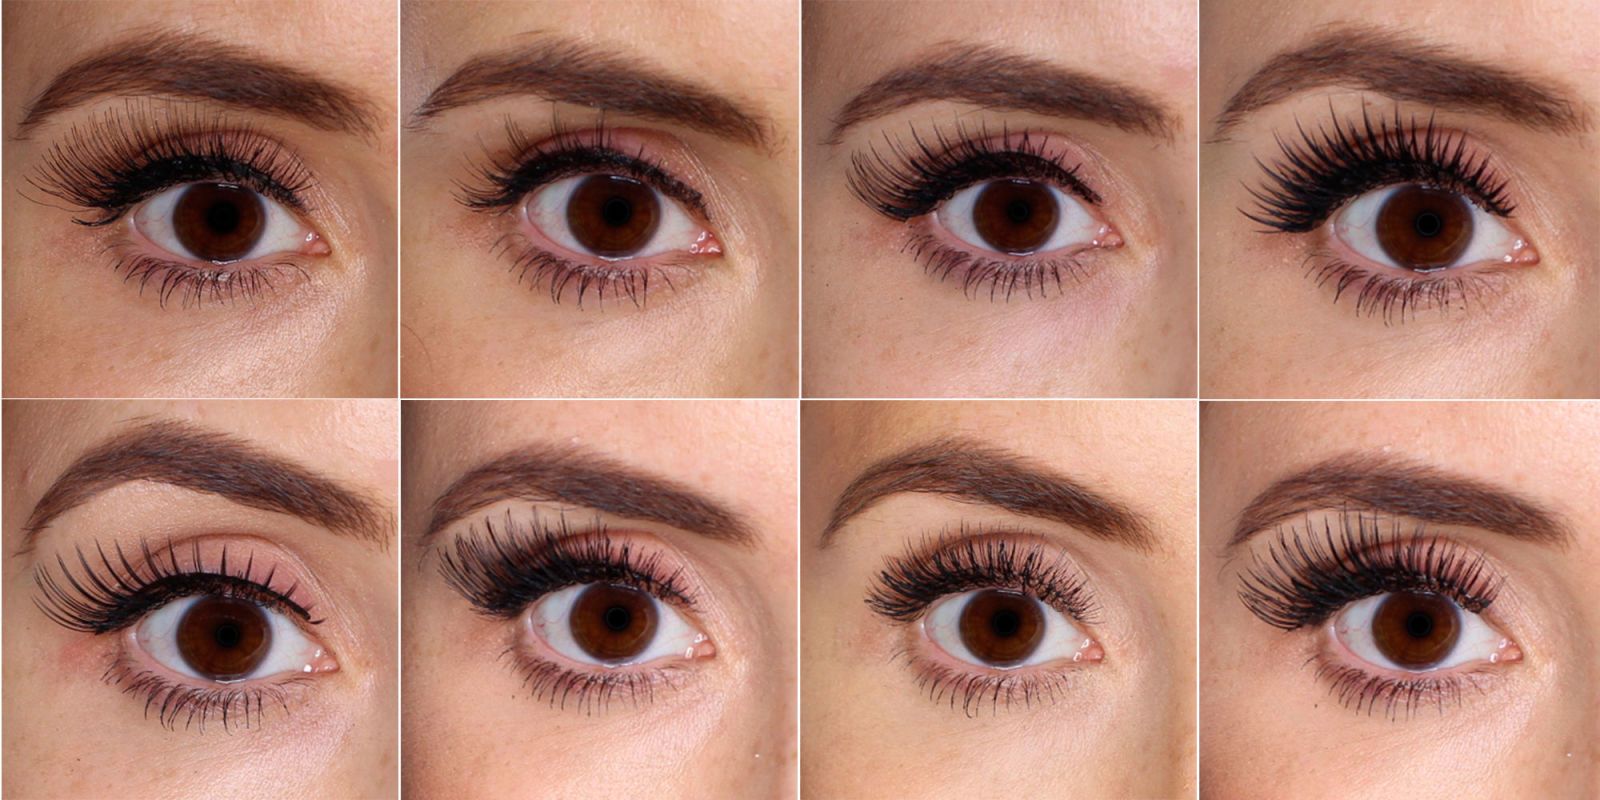 Andrea Strip Eye Lashes Styles 16 33 53 81 black or Brown 17 26 21 45 23 